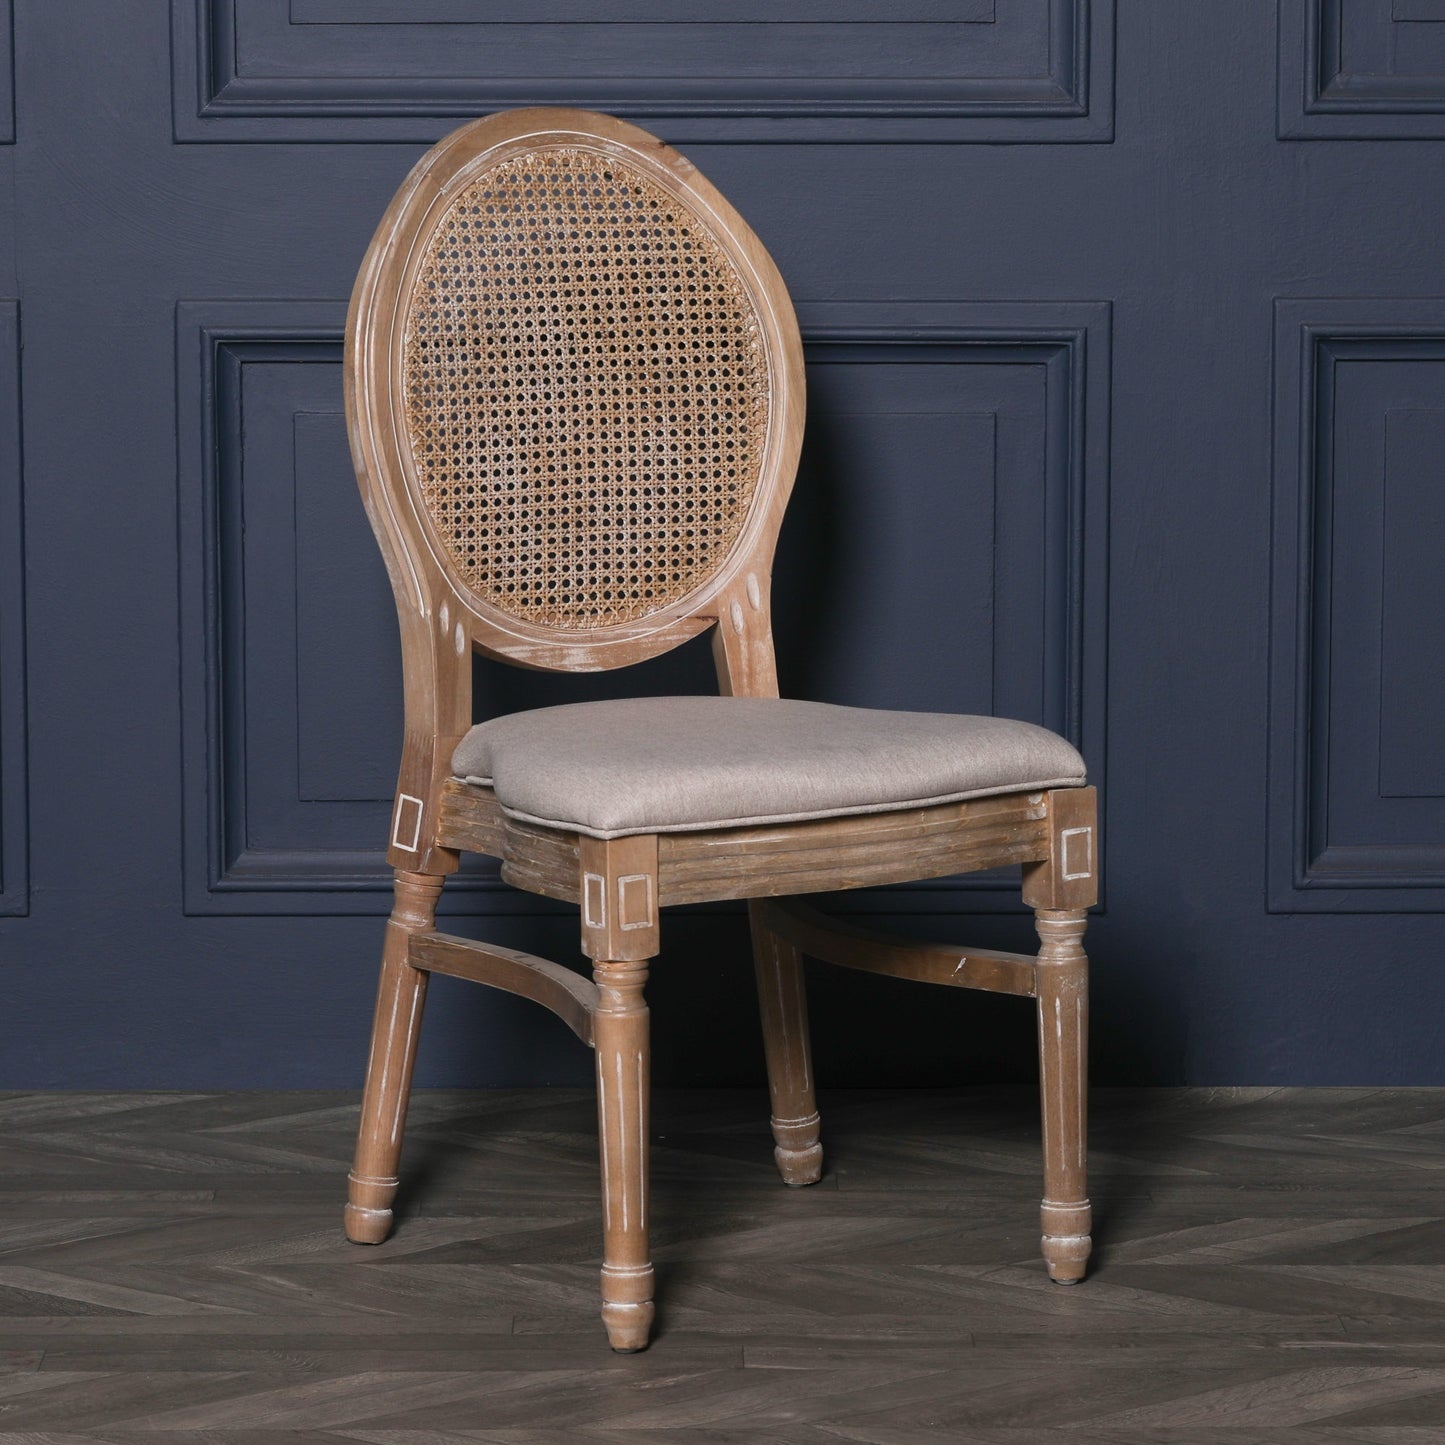 Wooden Louis Upholstered Dining Chair CasaFenix